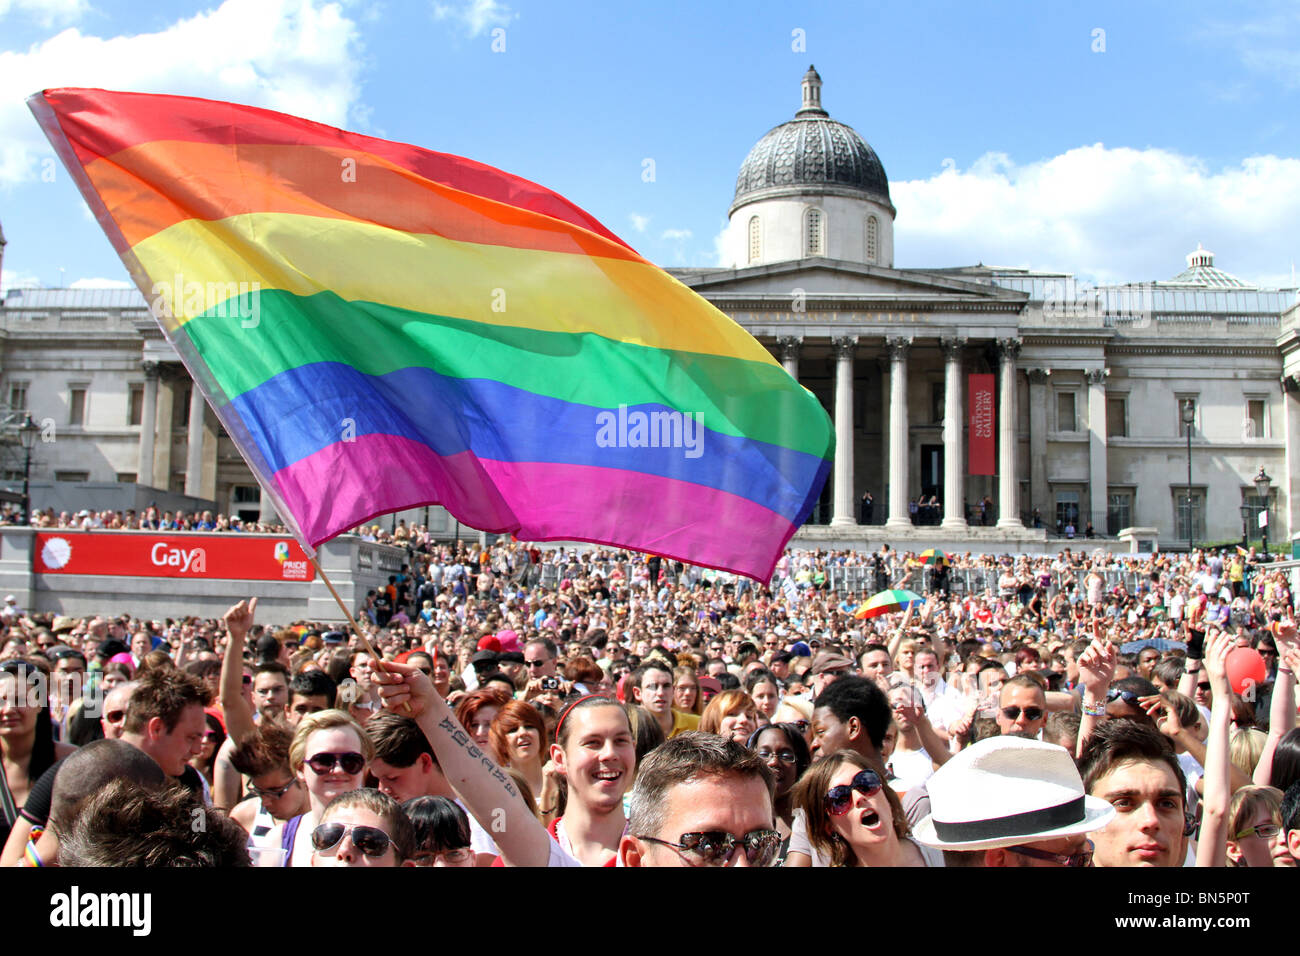 Rainbow flag and crowd in Trafalgar Square at the 40th Anniversary of Pride - Gay Pride Parade in London, 3rd July 2010 Stock Photo